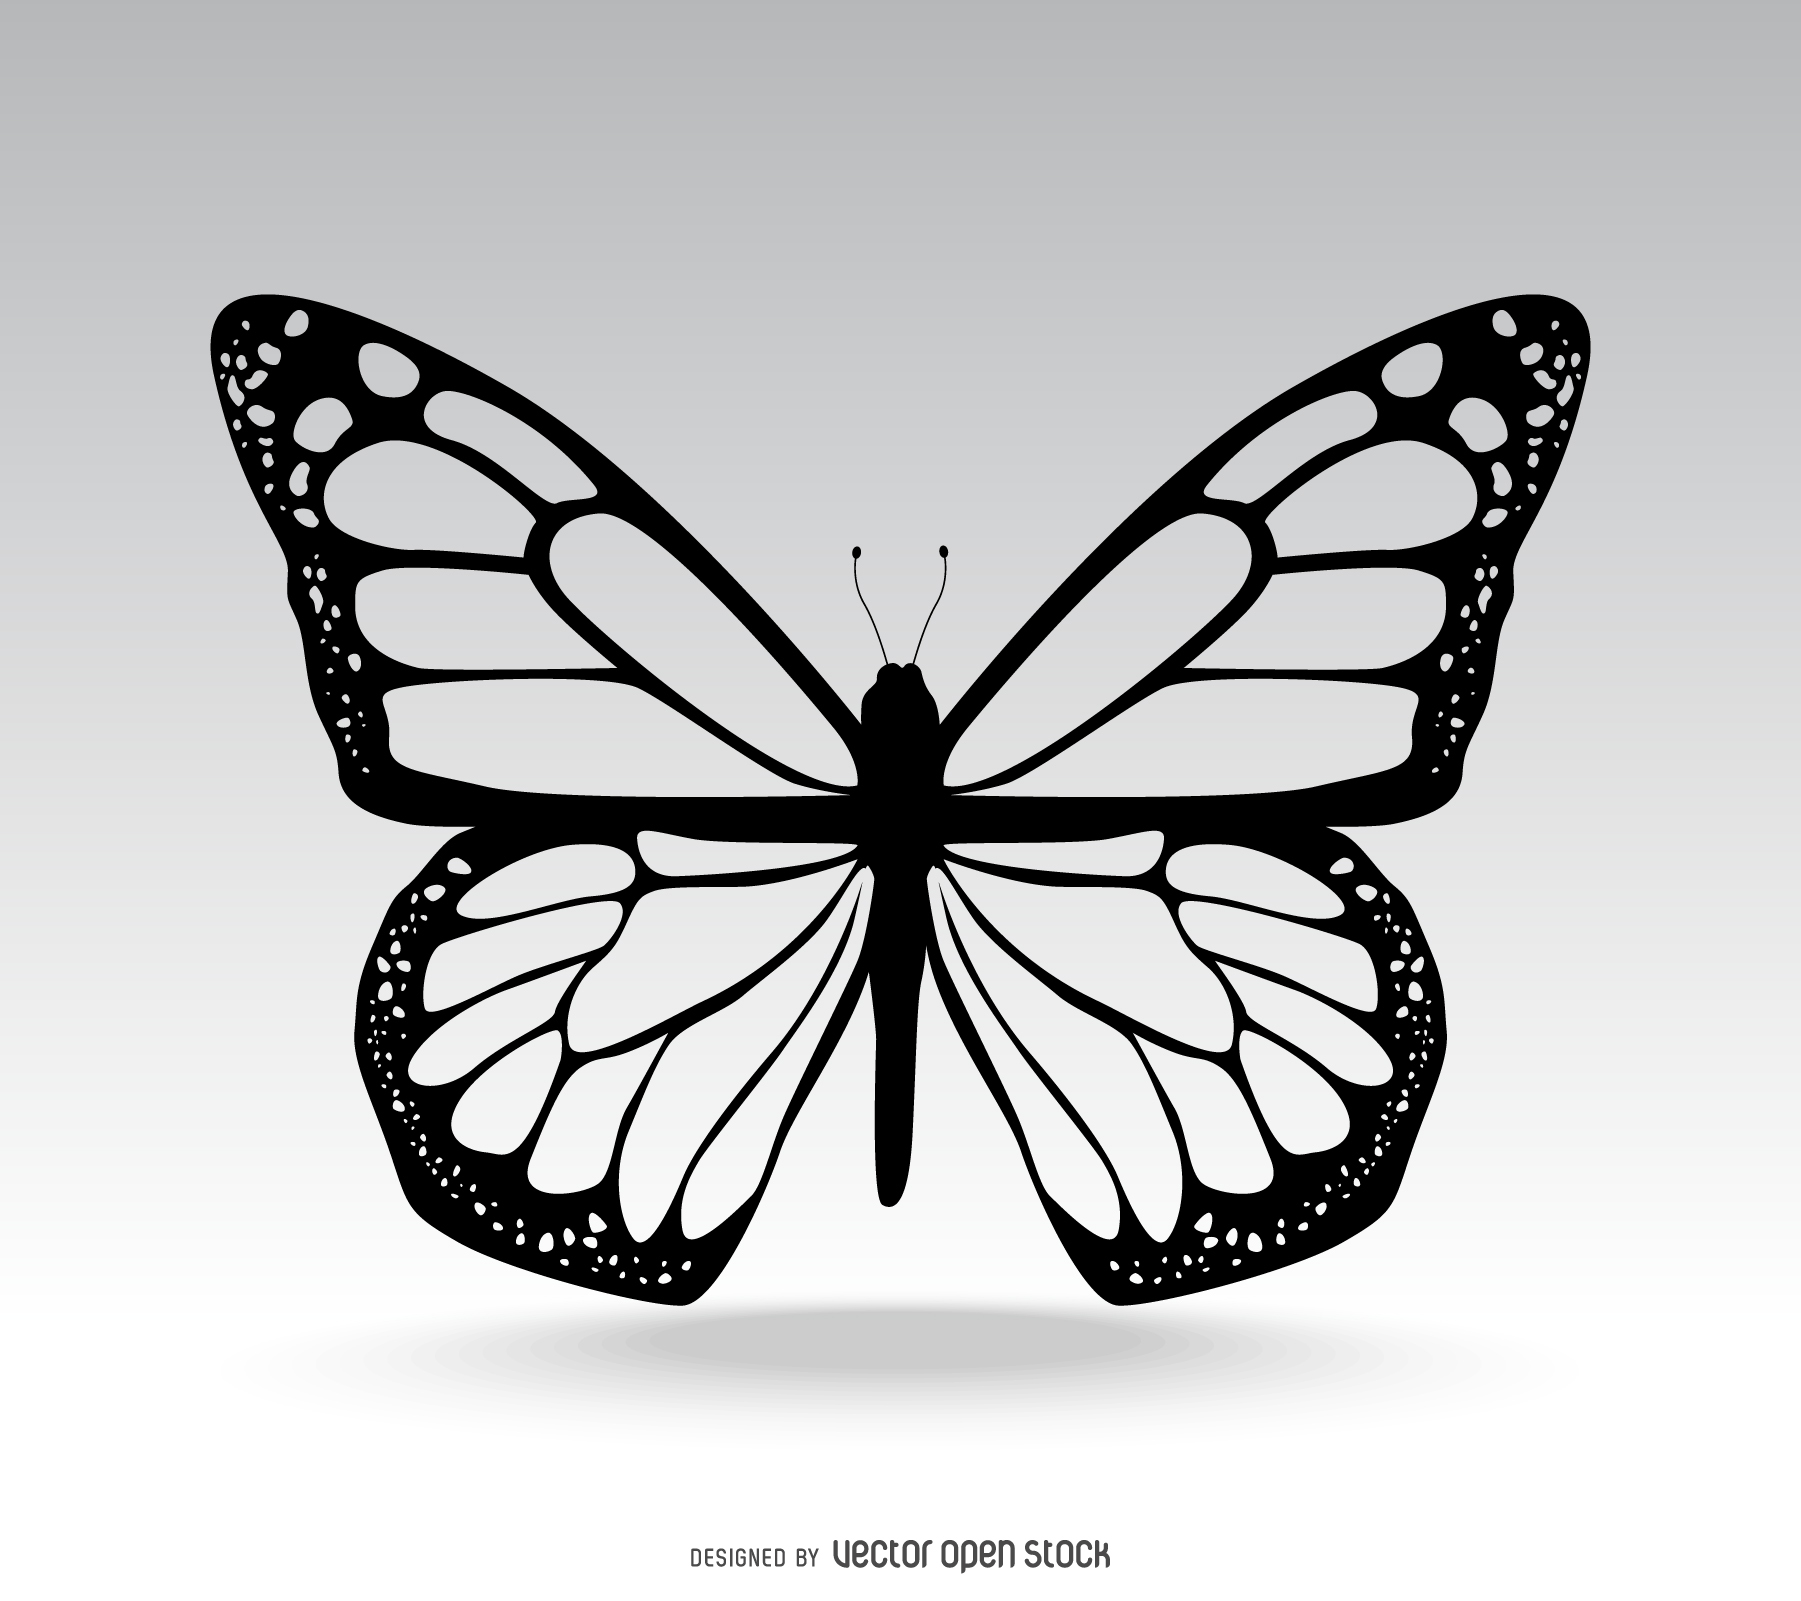 Classic isolated butterfly illustration - Vector download